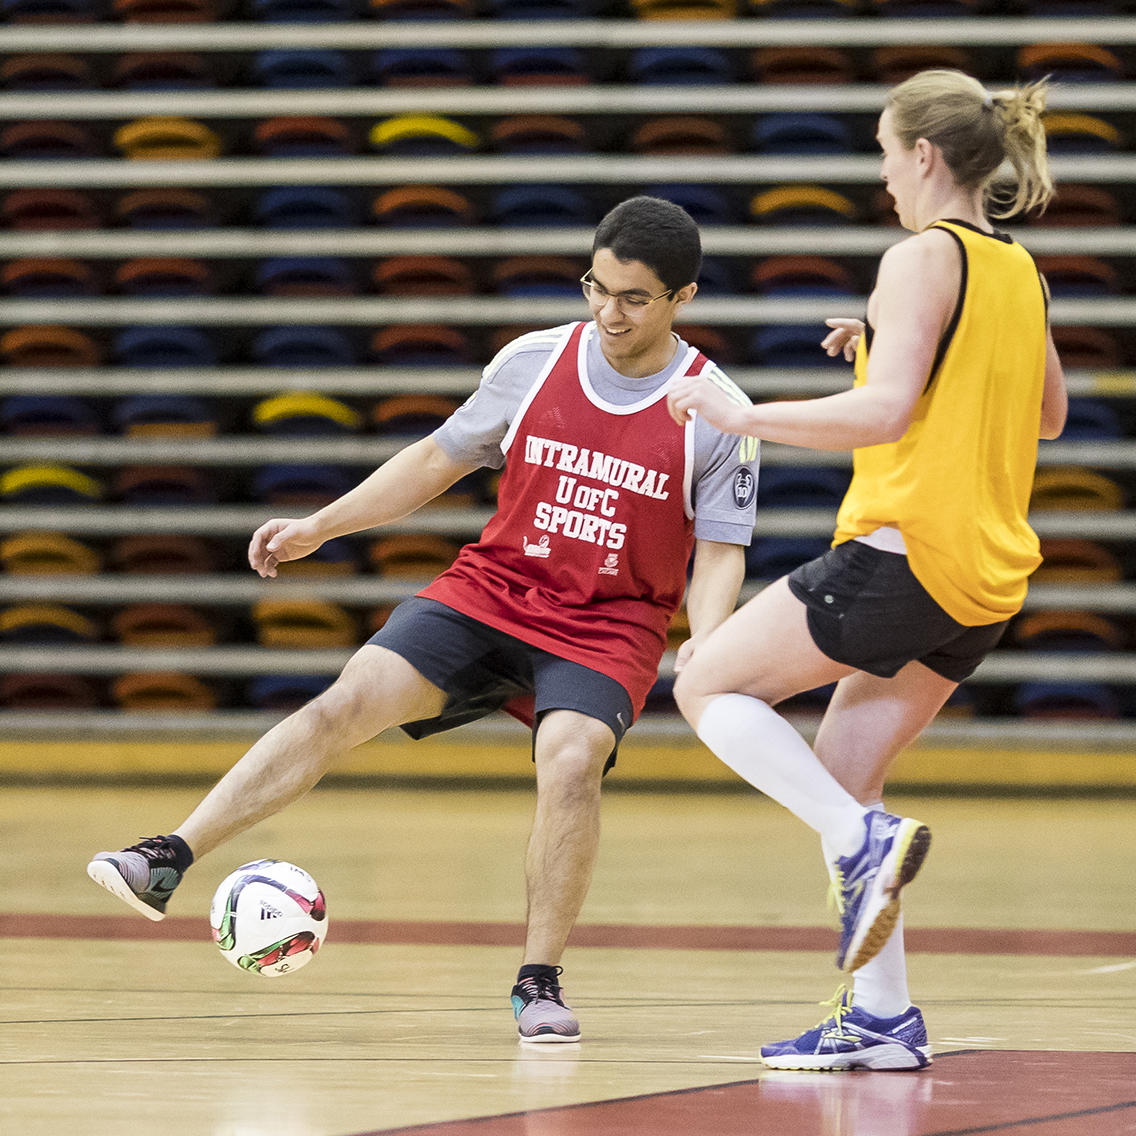 coed-soccer game in a gym